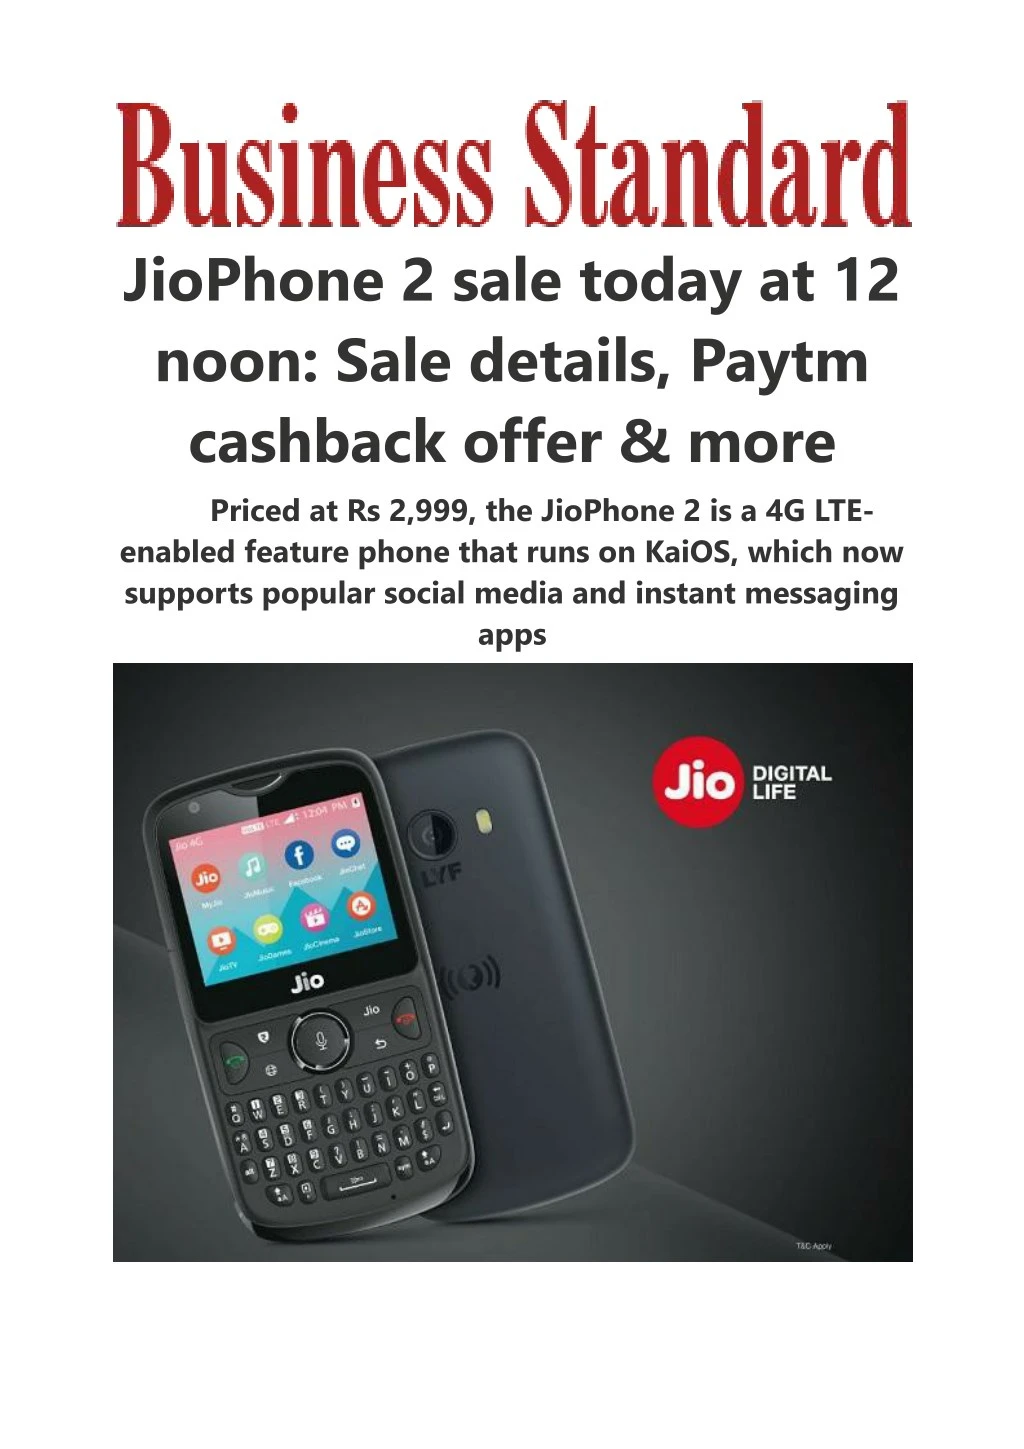 jiophone 2 sale today at 12 noon sale details